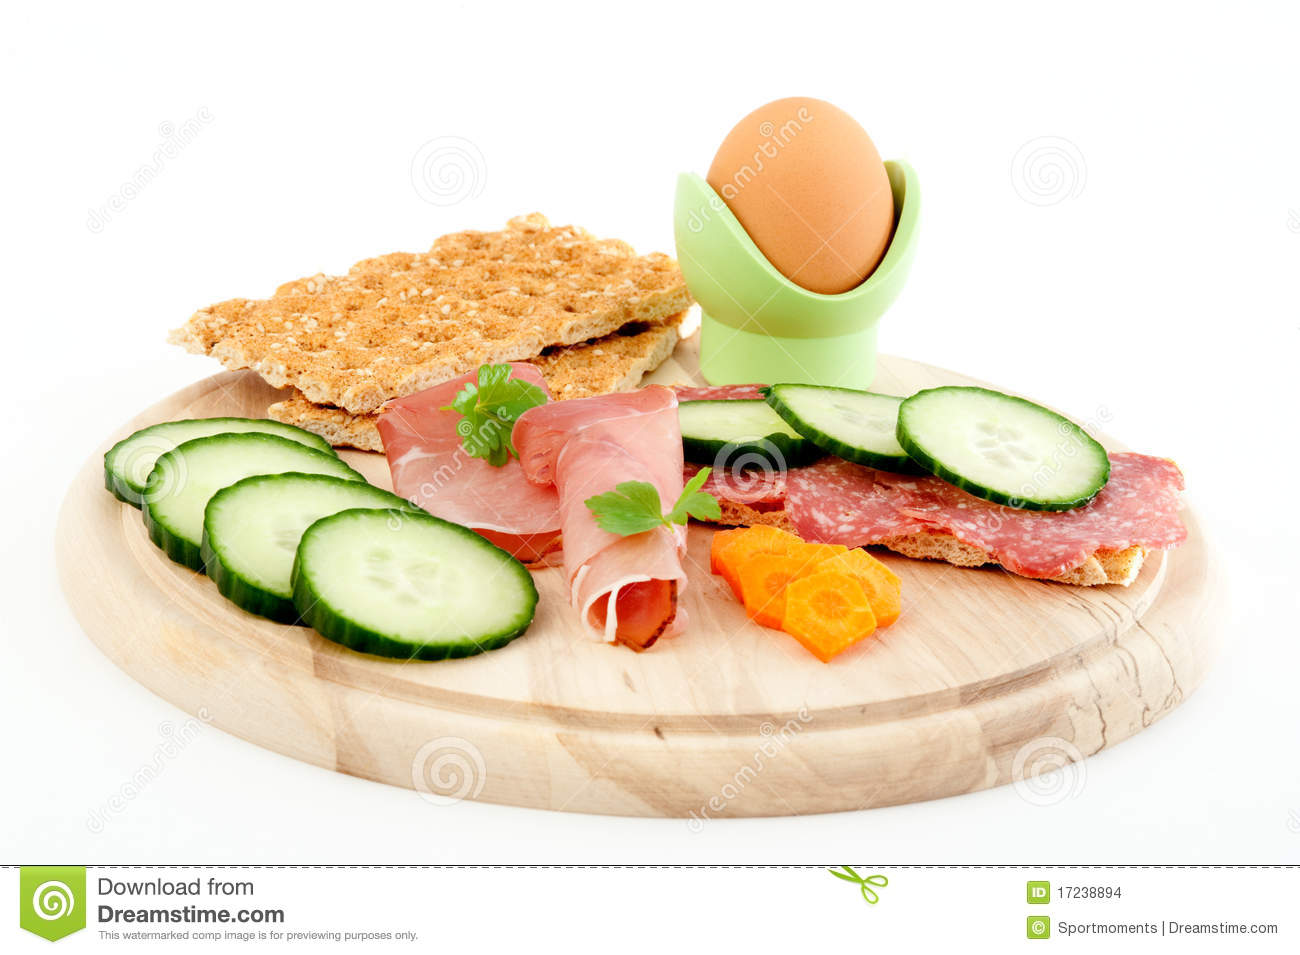 Healthy Breakfast On Board Stock Images   Image  17238894